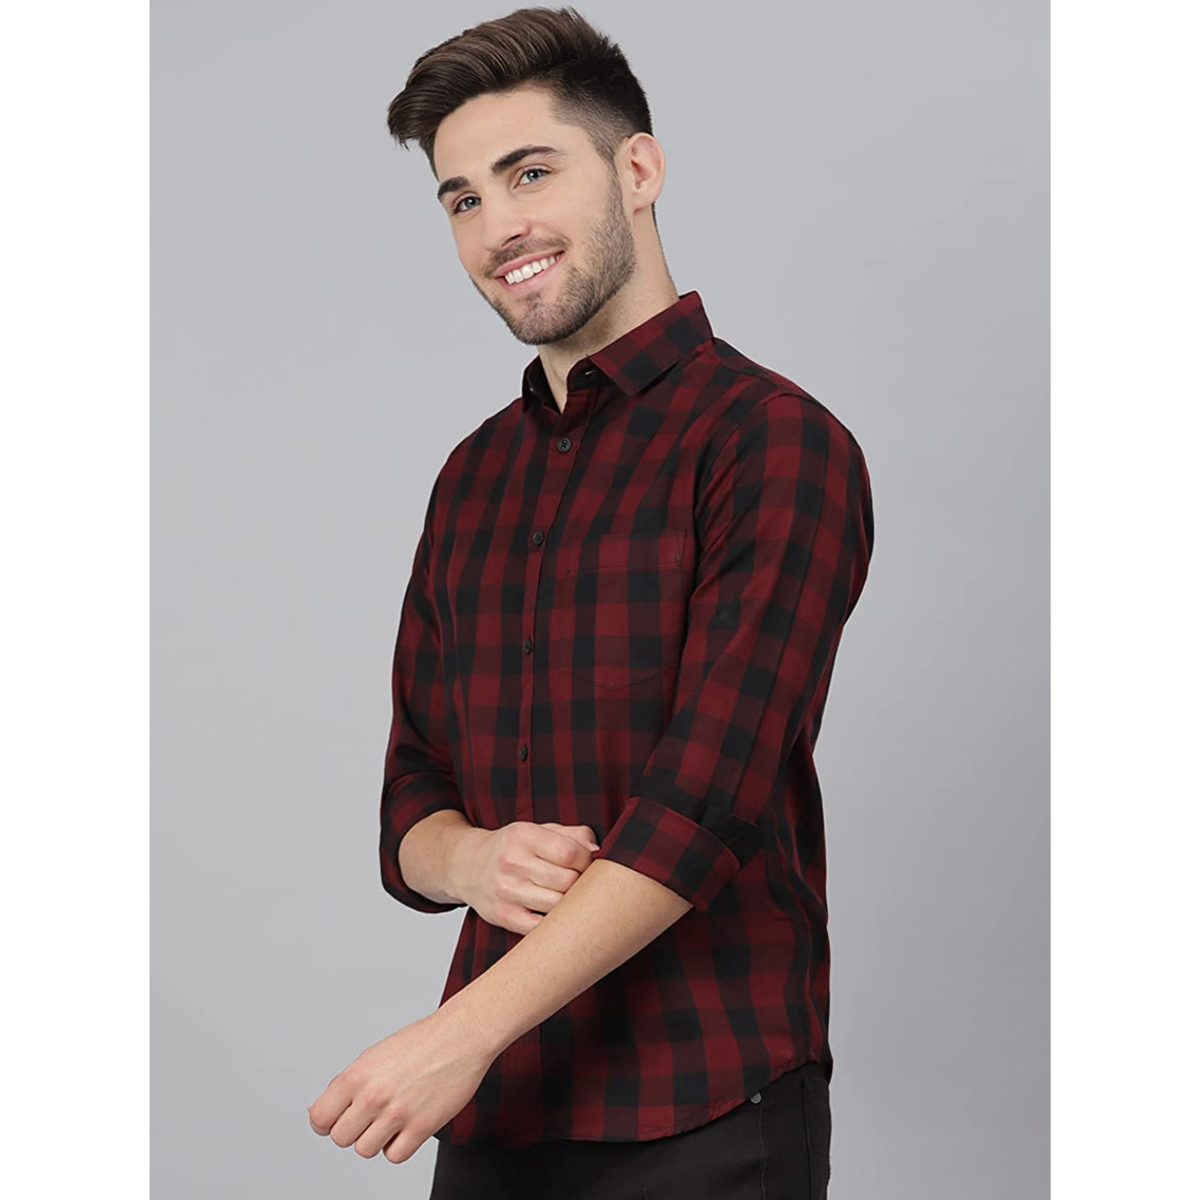 Checkered Shirts for Men: Find 5 Best Checkered Shirts for Men in